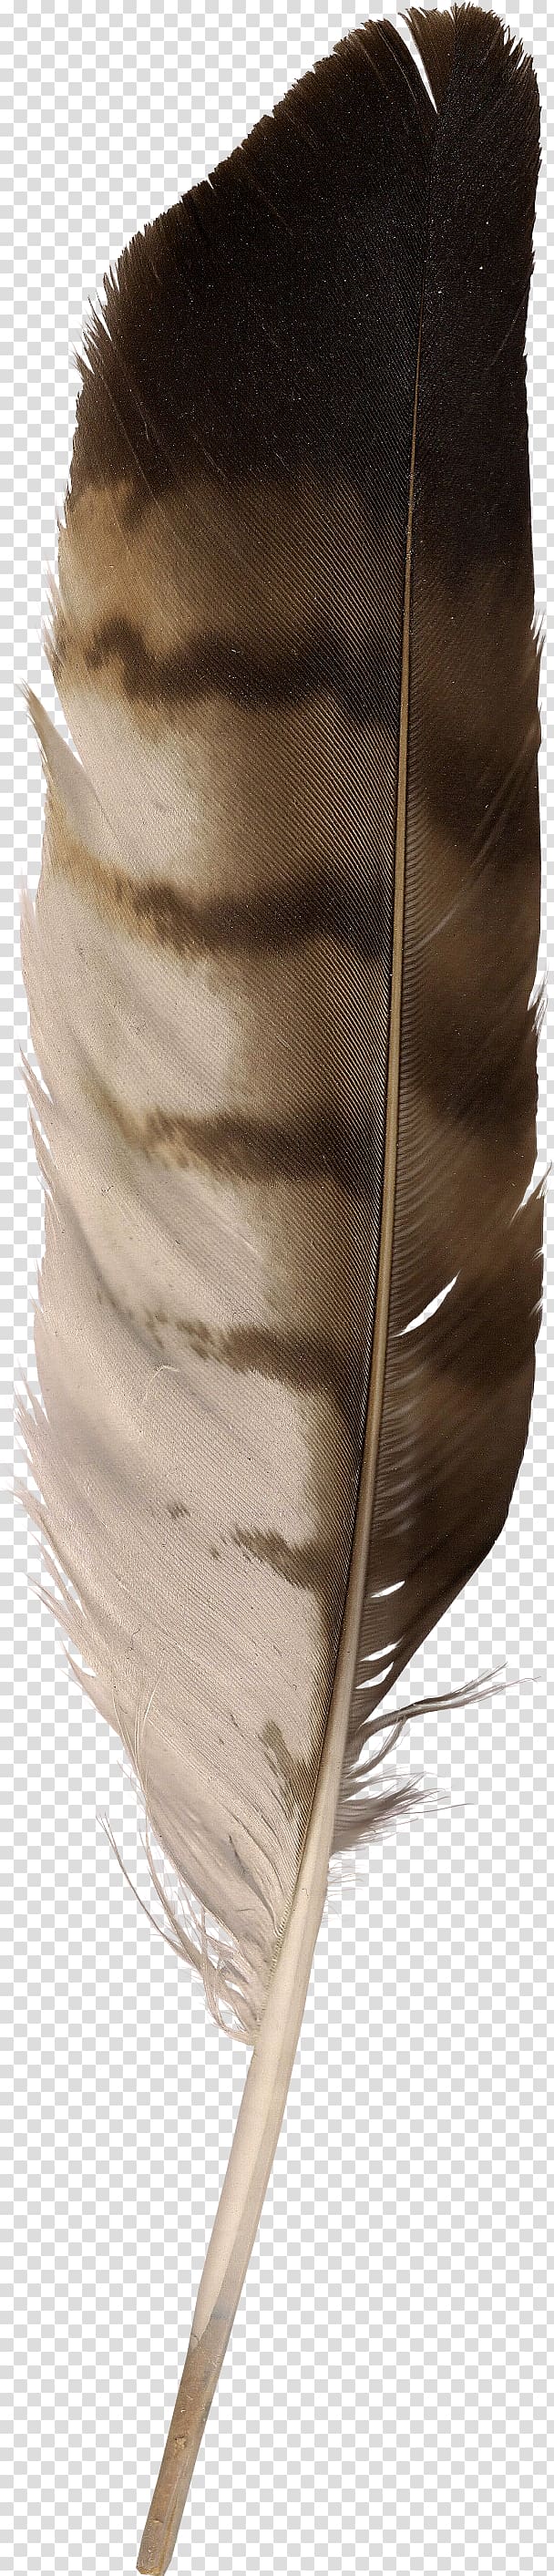 brown feather, Eagle feather law Goose, feather transparent background PNG clipart